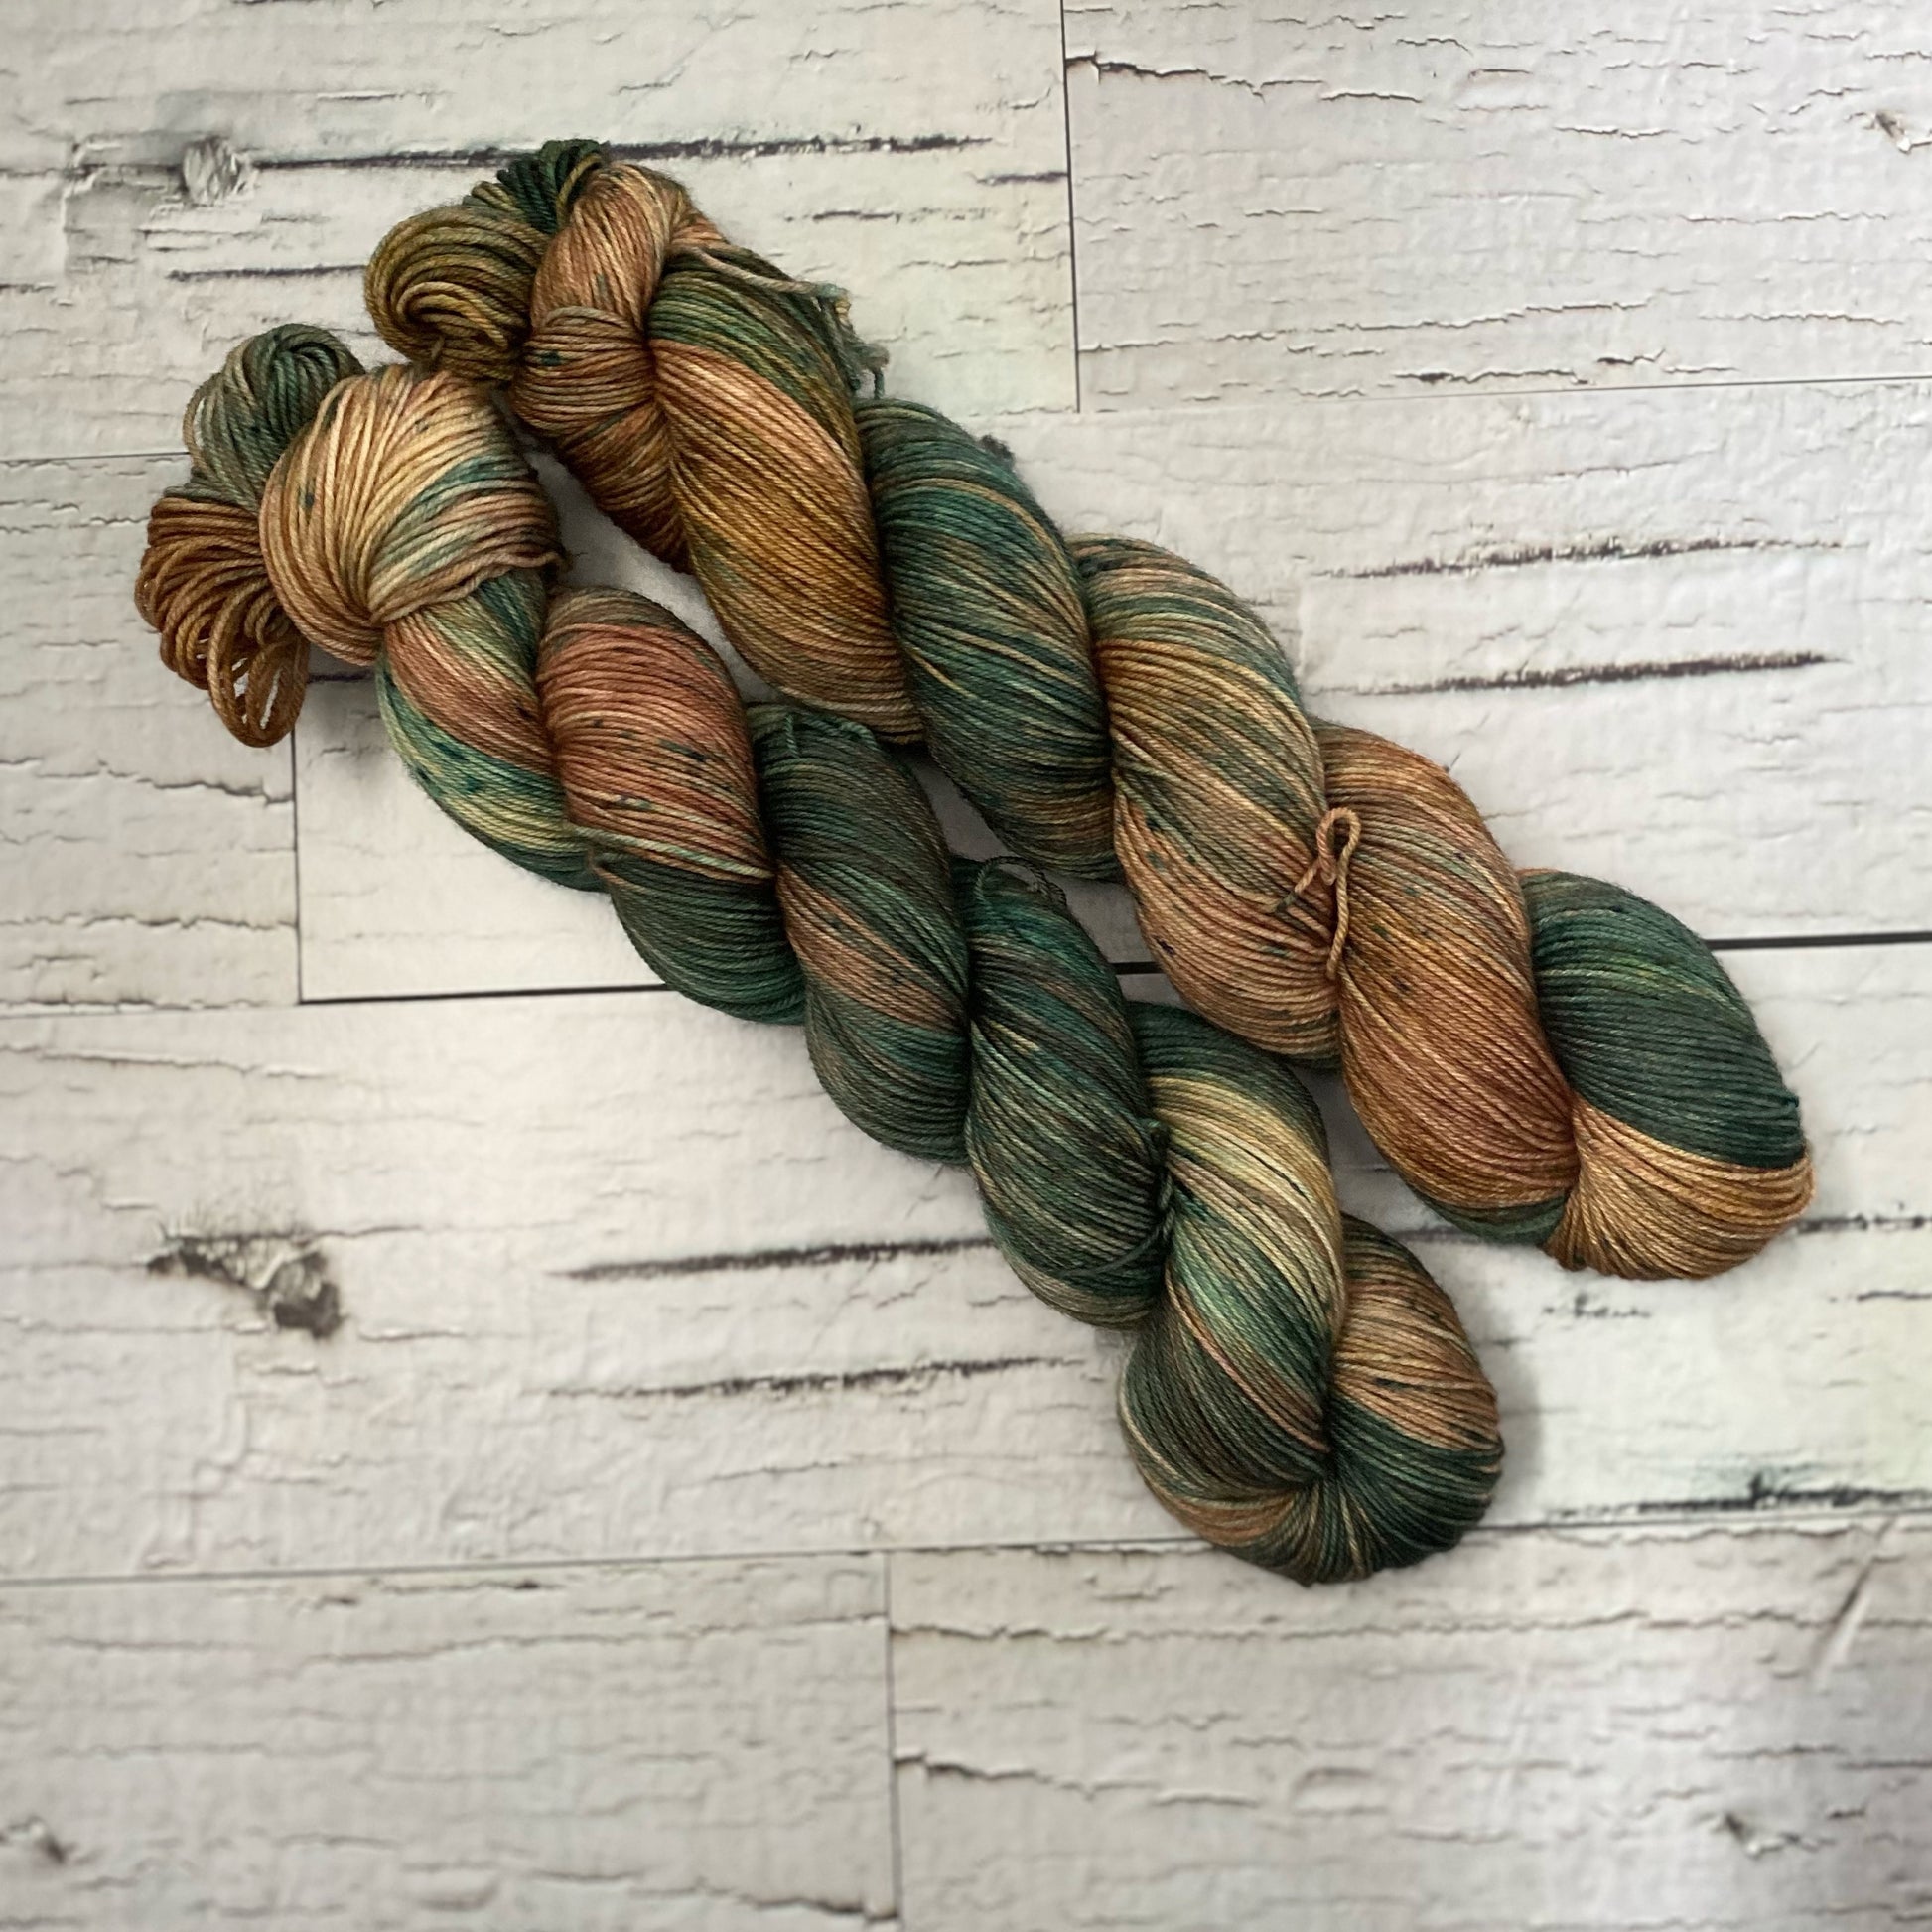 Two skeins of brown and green variegated hand dyed yarn laid on a white wood plank background.